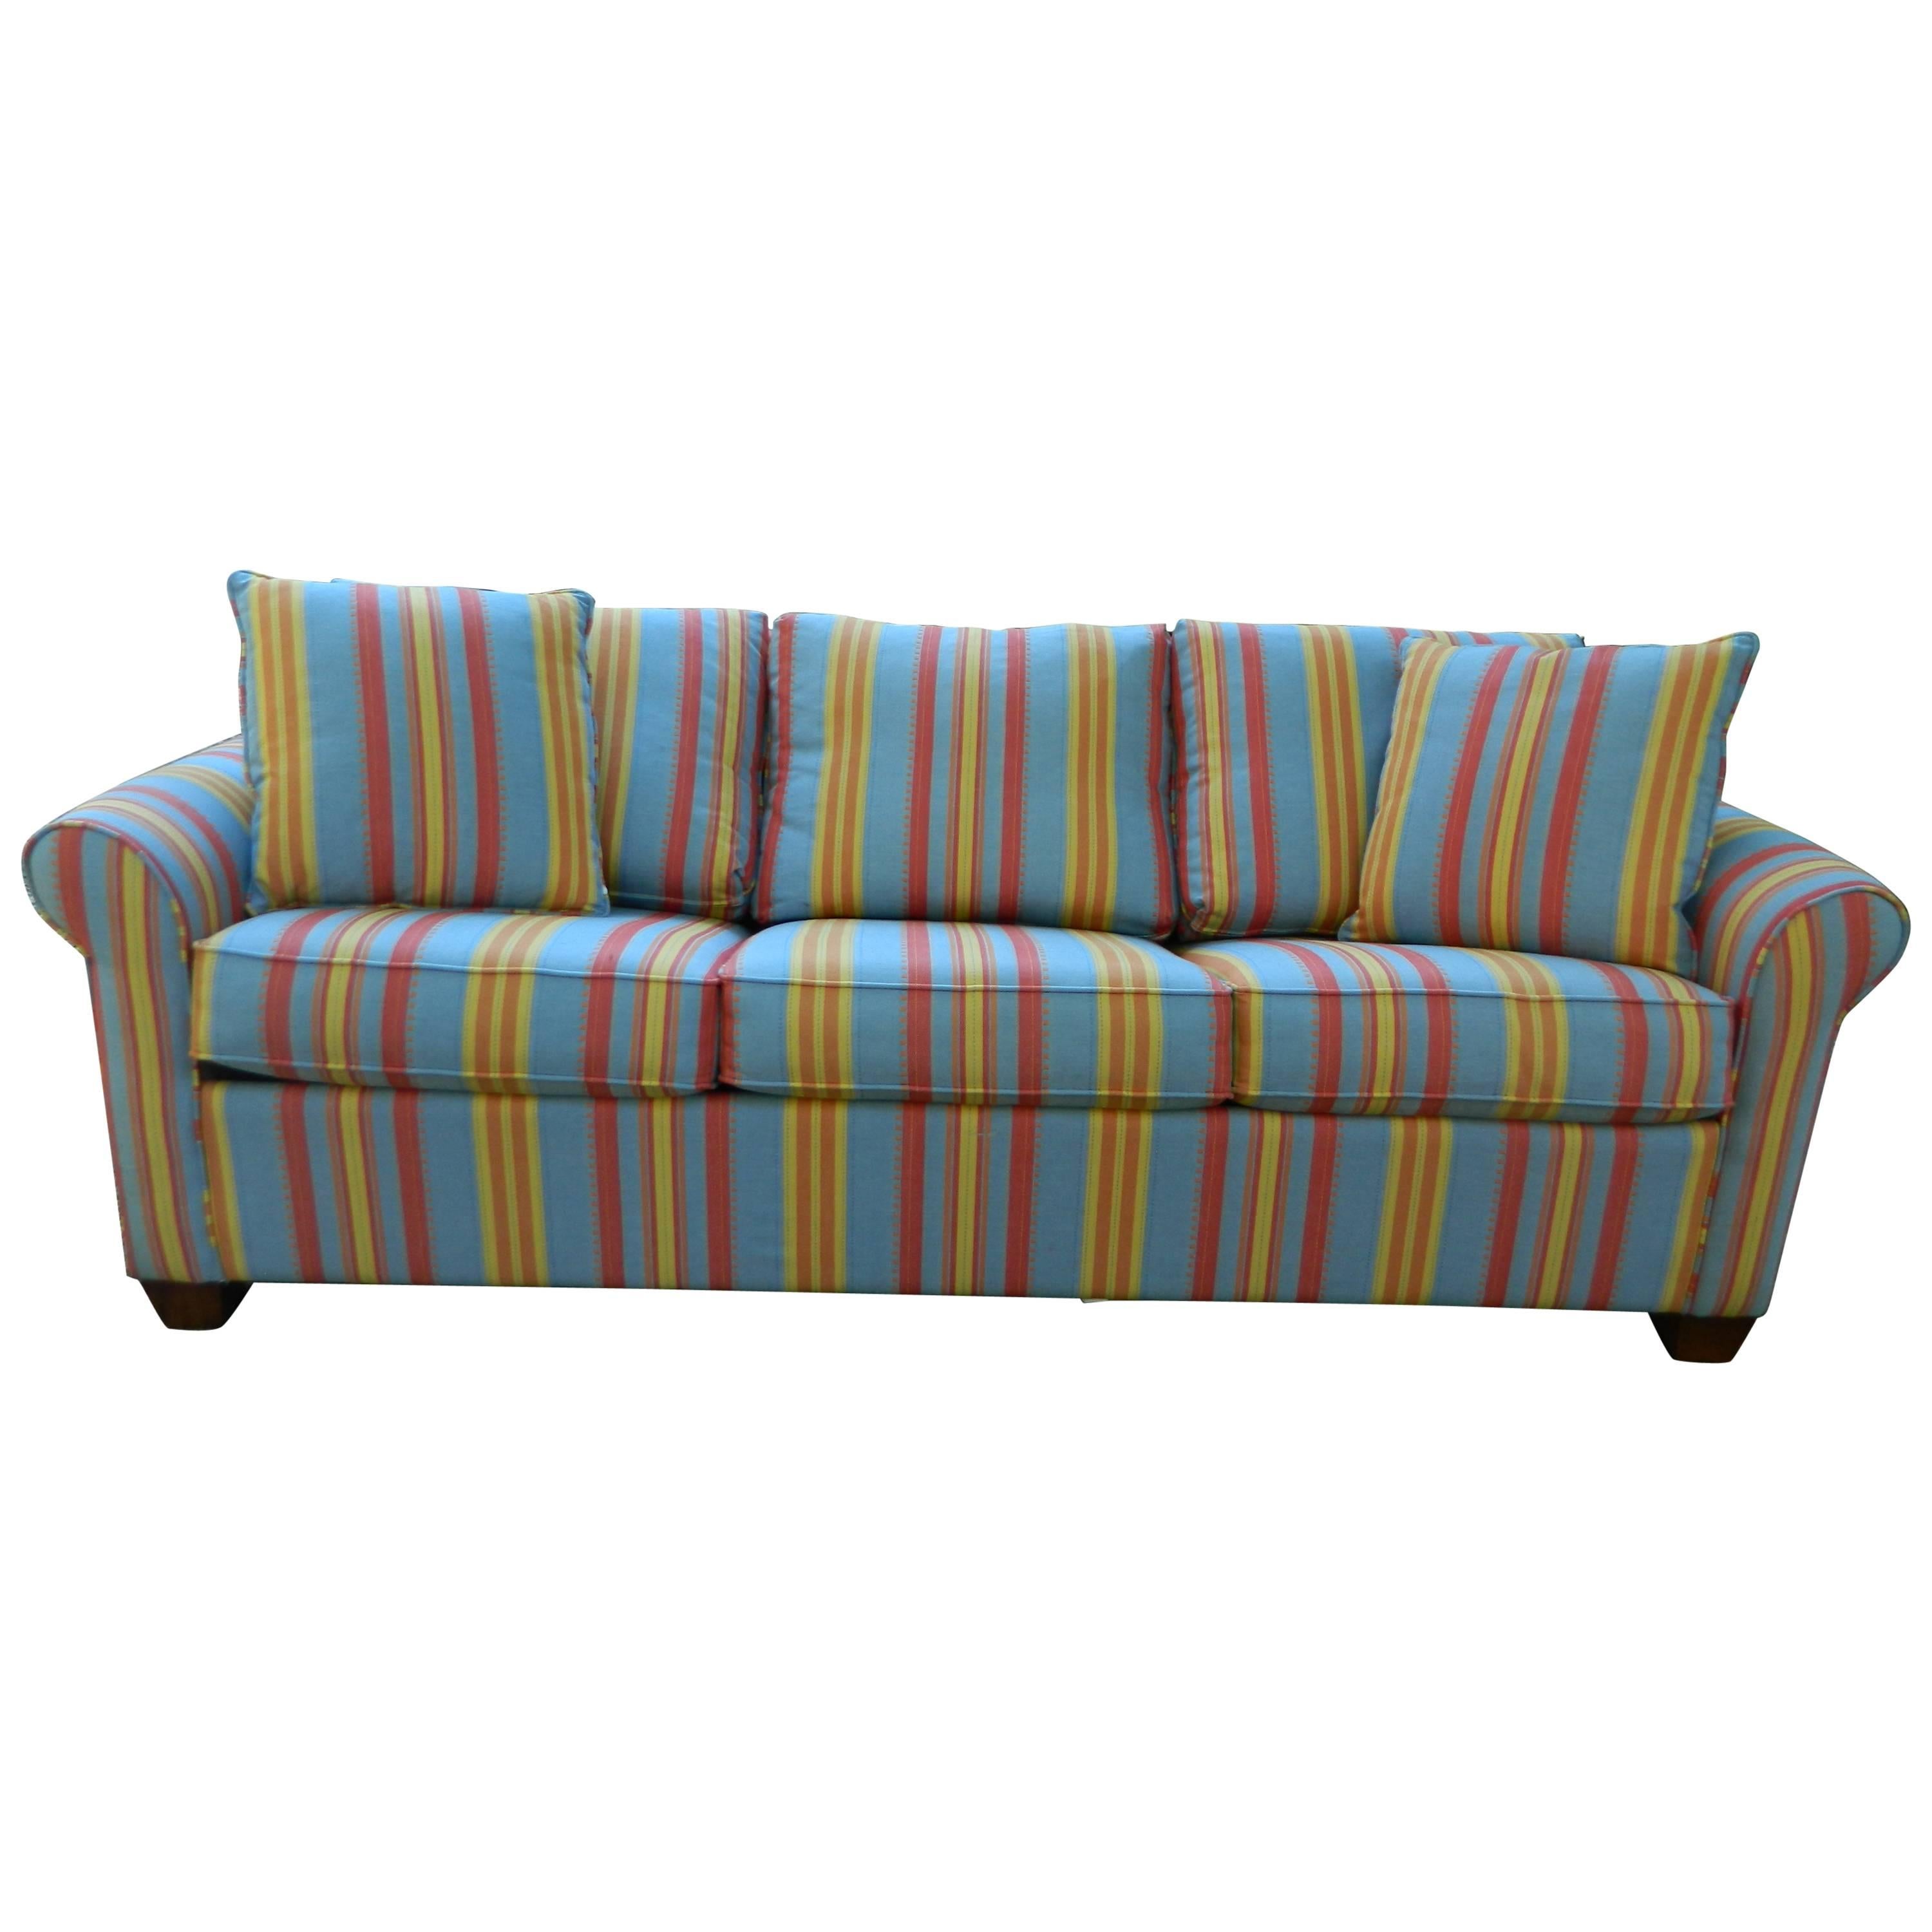 Upholstered Sofa Bed in a Multi-Color Stripe Fabric, 20th Century